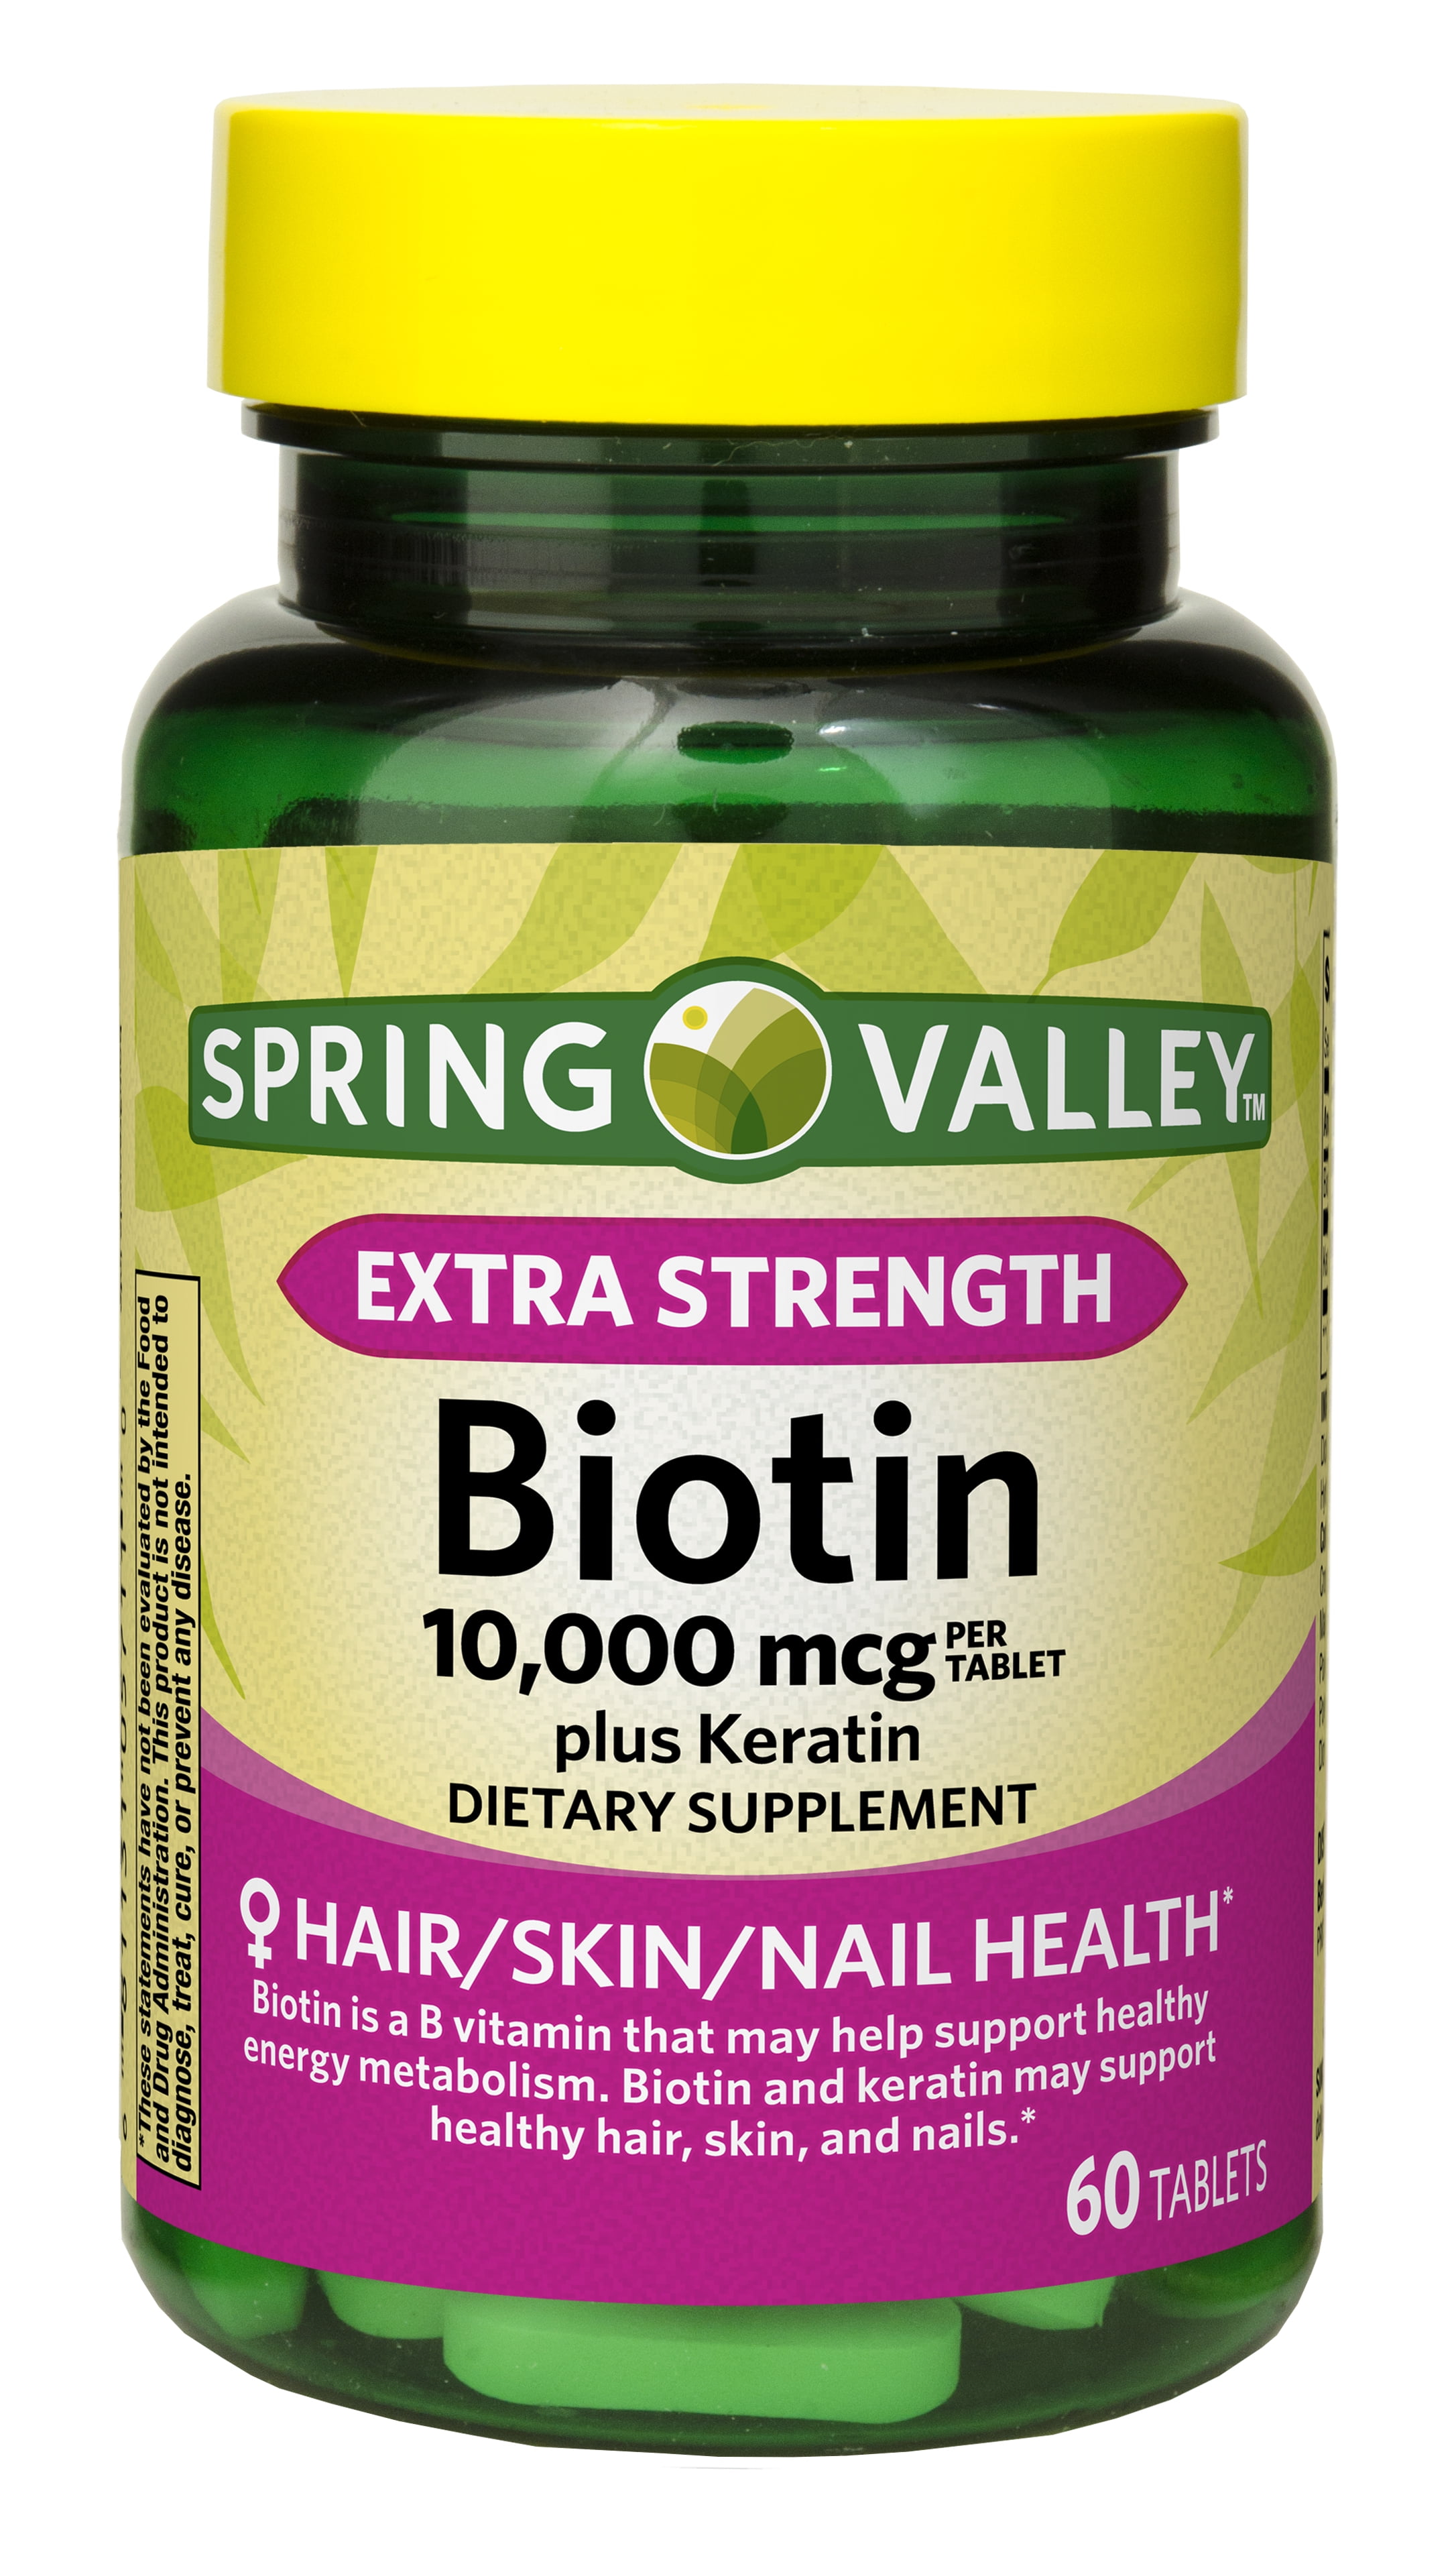 Spring Valley Extra Strength Biotin Plus Keratin Tablets Dietary Supplement, 10,000 mcg, 60 Count